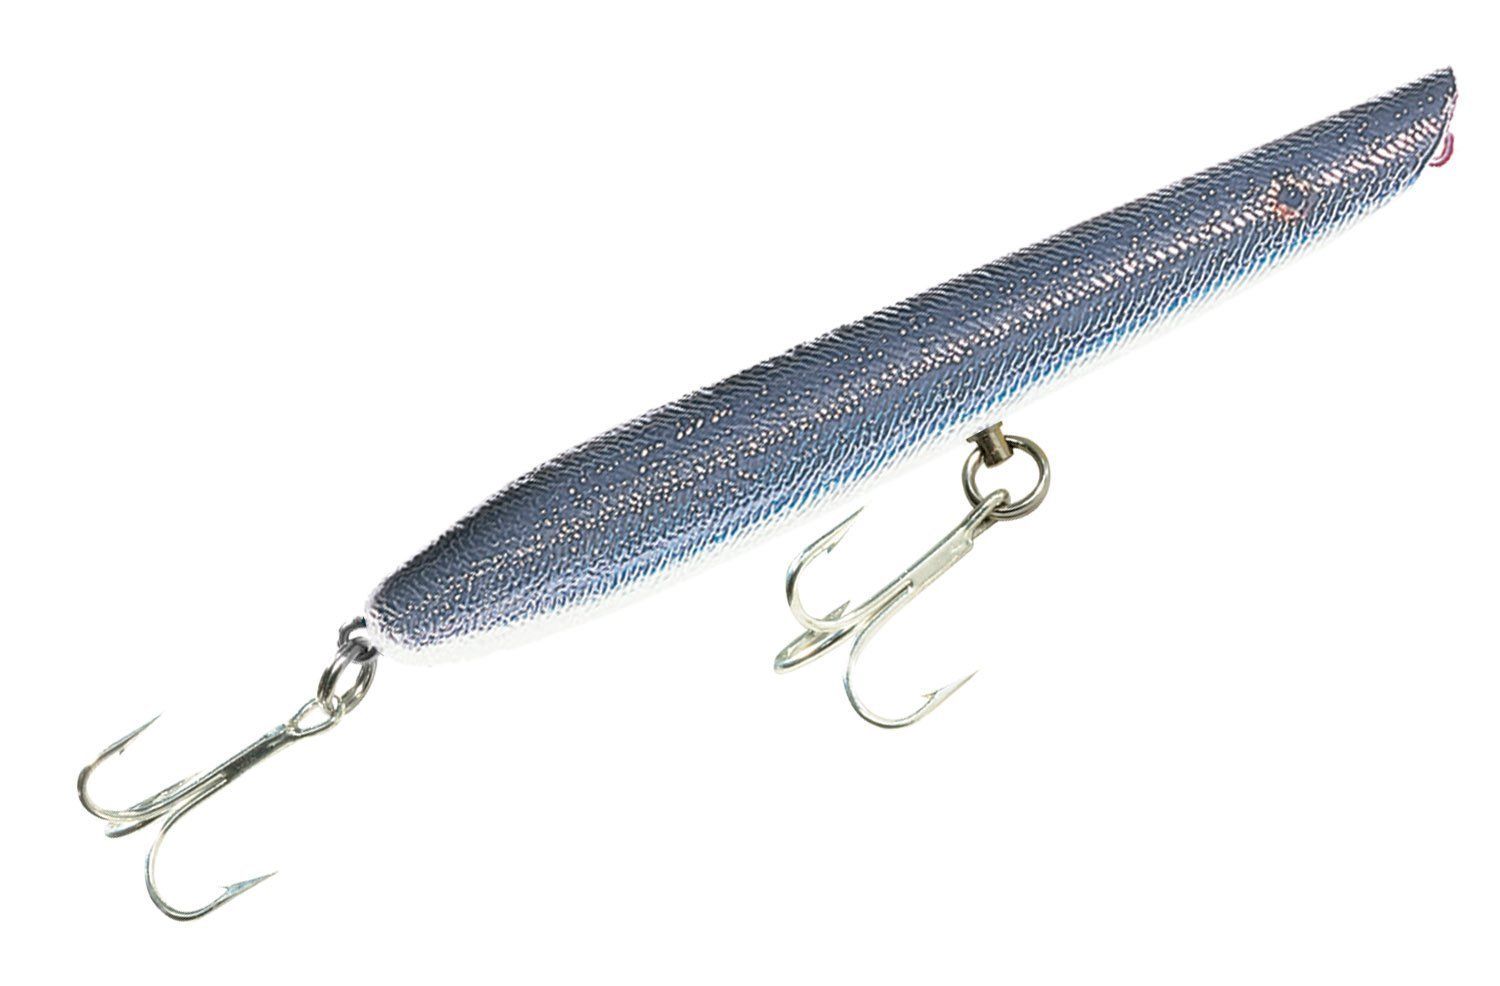 Cotton Cordell Pencil Popper Lures, Topwater Lures -  Canada